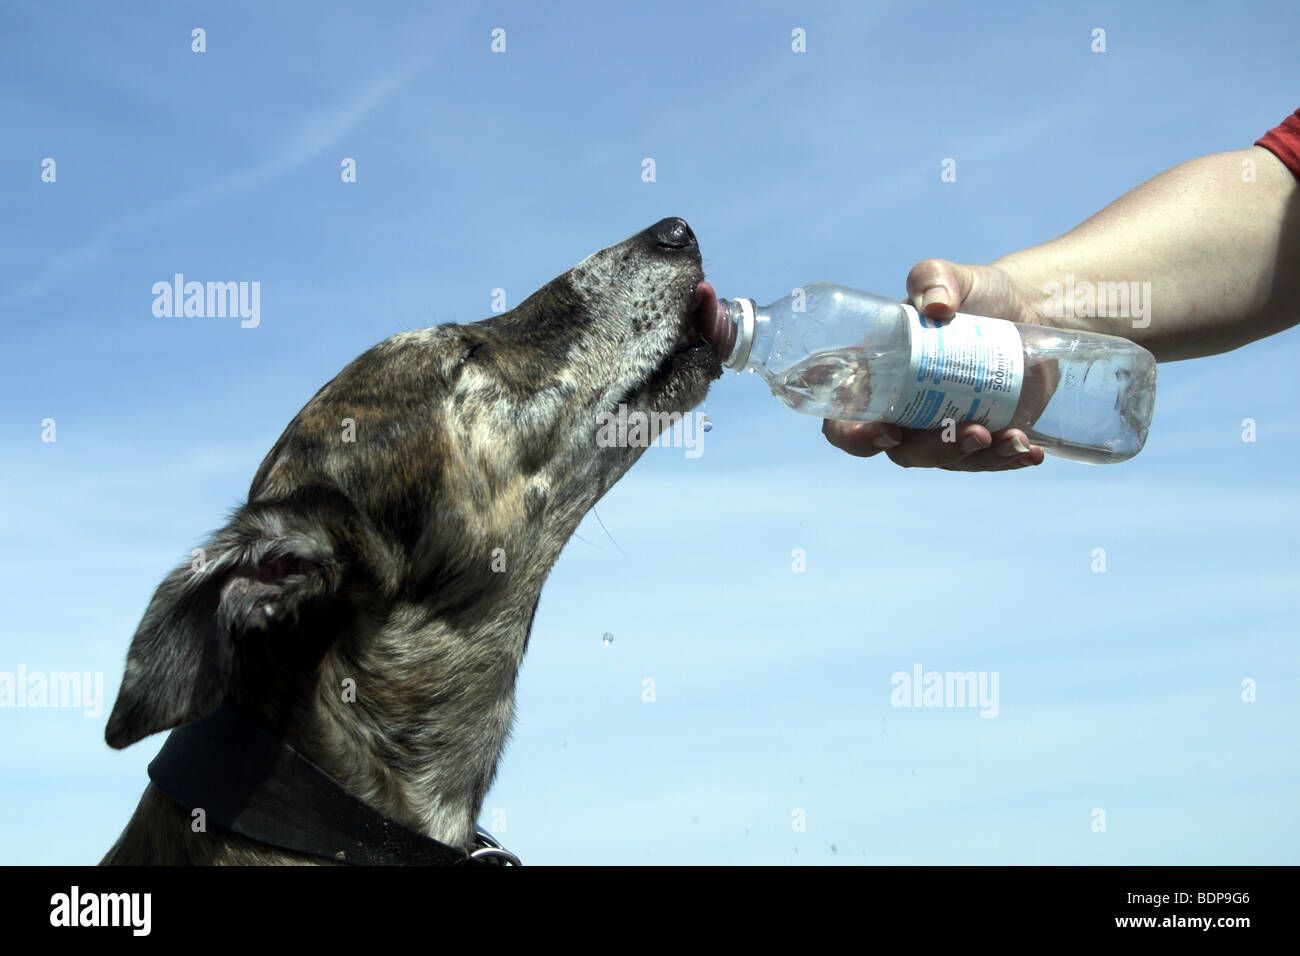 Thirsty dog drinking from water bottle on hot summers day. Stock Photo